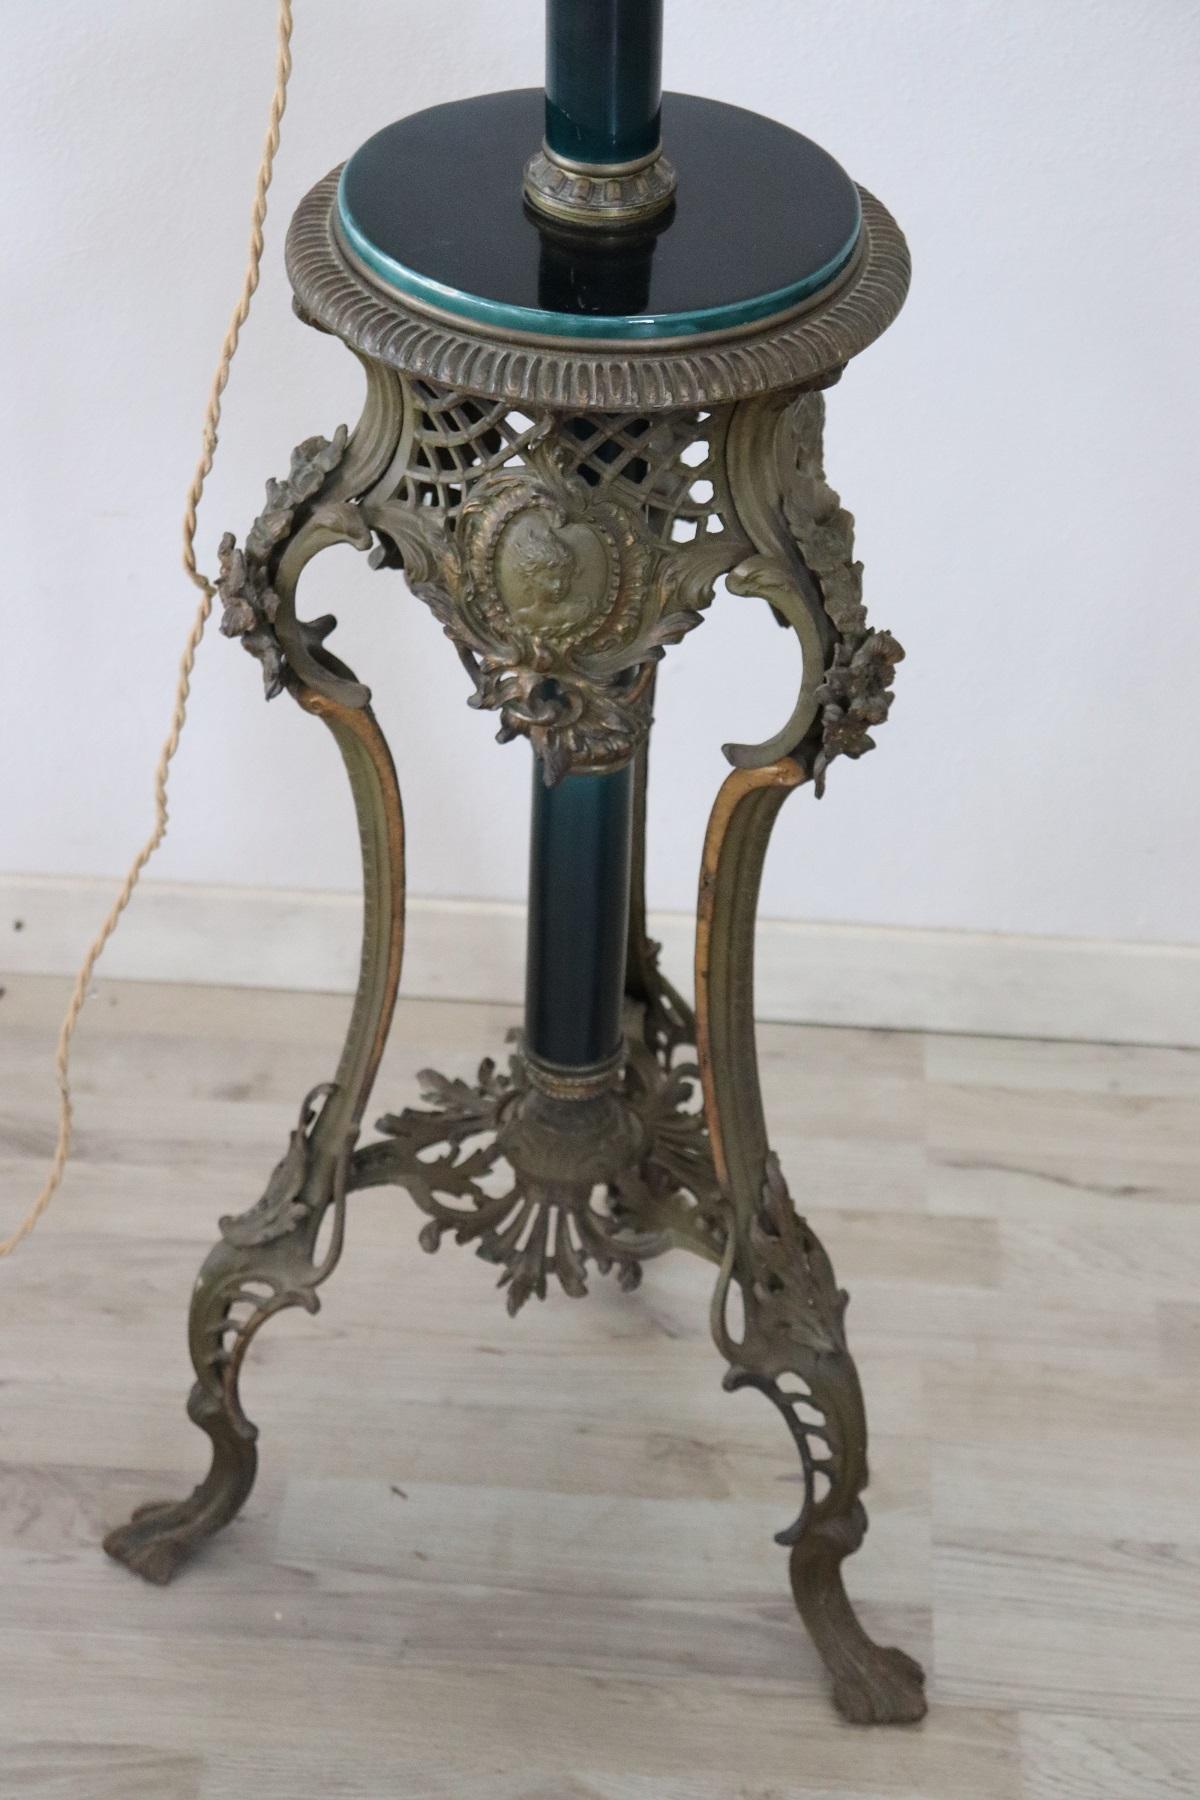 Beautiful antique floor lamp in green ceramic and finely chiselled gilded bronzes with figures. Originally the lamp worked in oil, the electrical system was made in the early decades of the 20th century. The gilded bronze has an ancient patina.